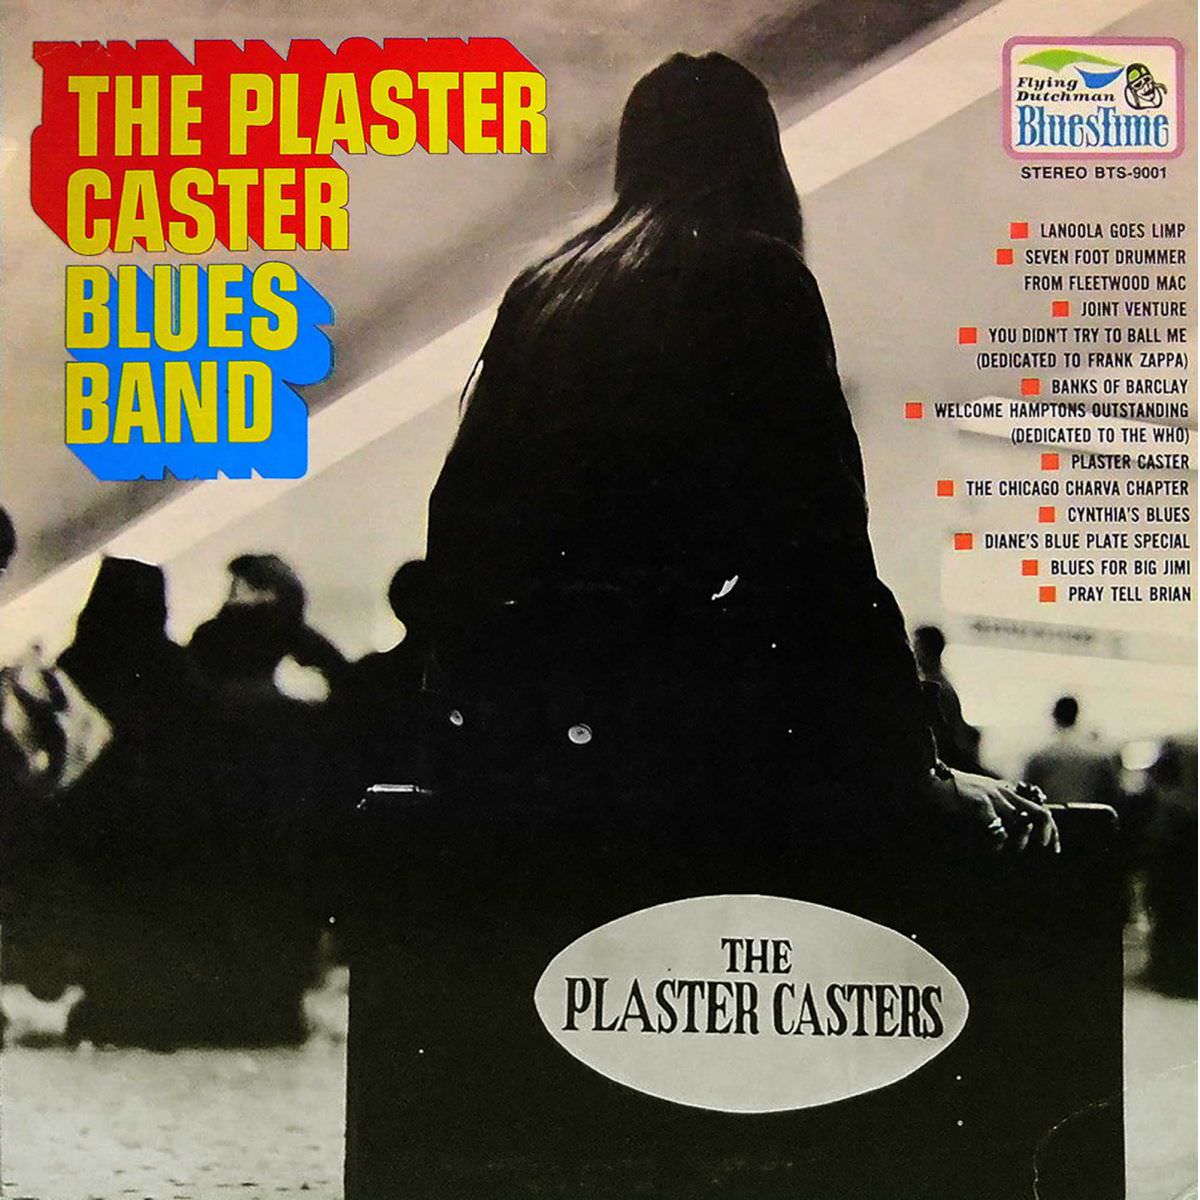 The Plaster Caster Blues Band – The Plaster Caster Blues Band (1969/2018) [FLAC 24bit/44,1kHz]